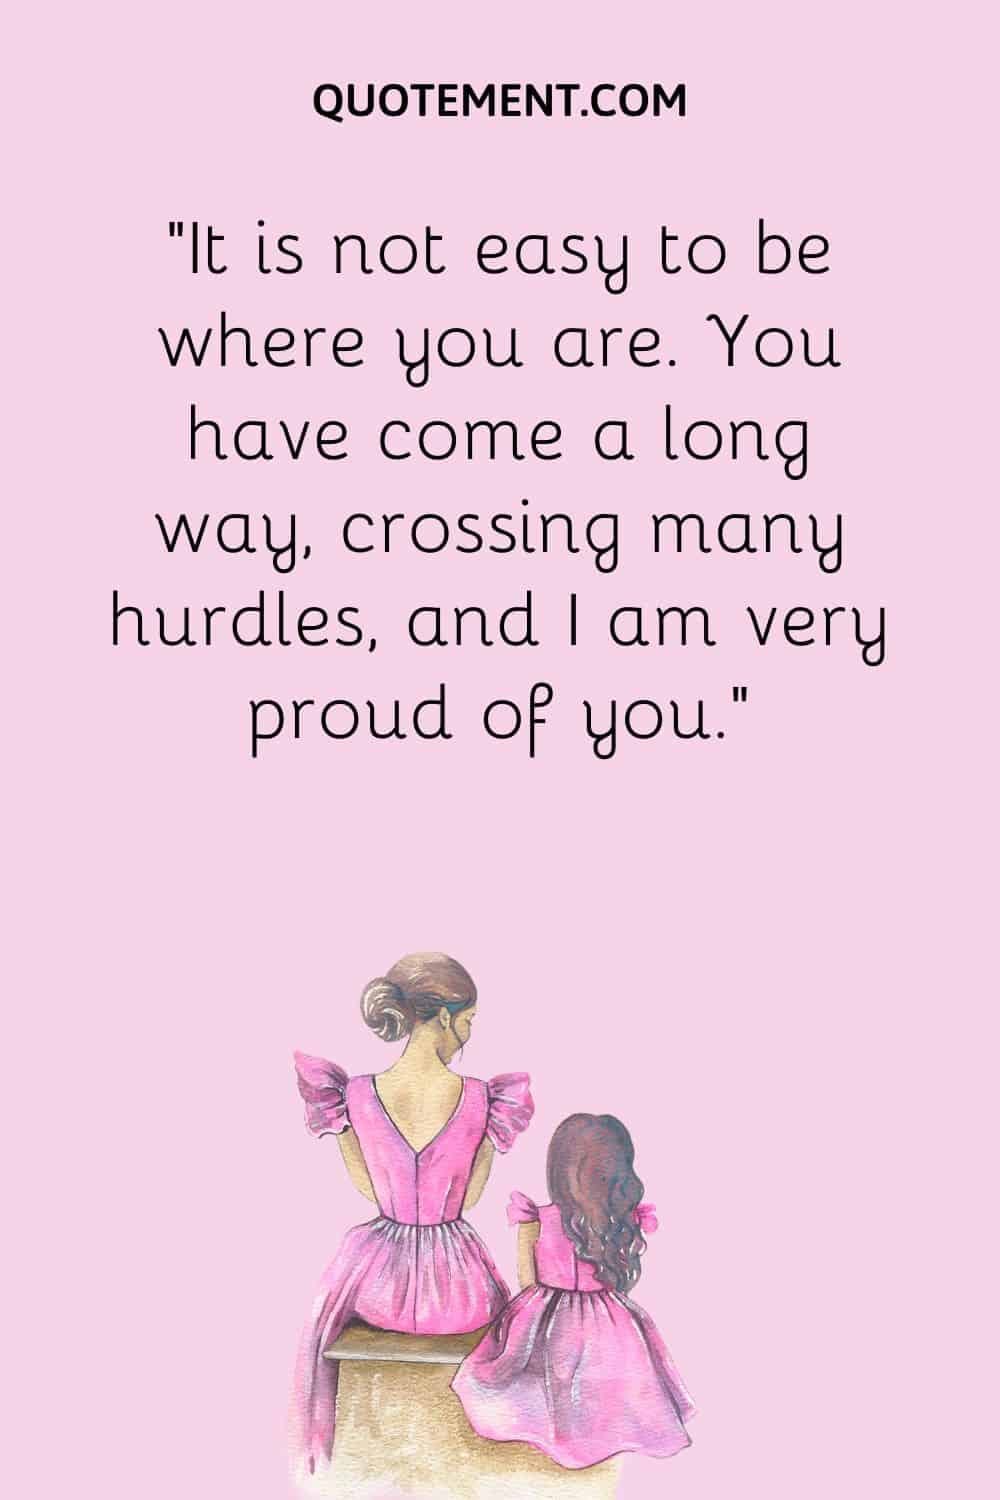 “It is not easy to be where you are. You have come a long way, crossing many hurdles, and I am very proud of you.”